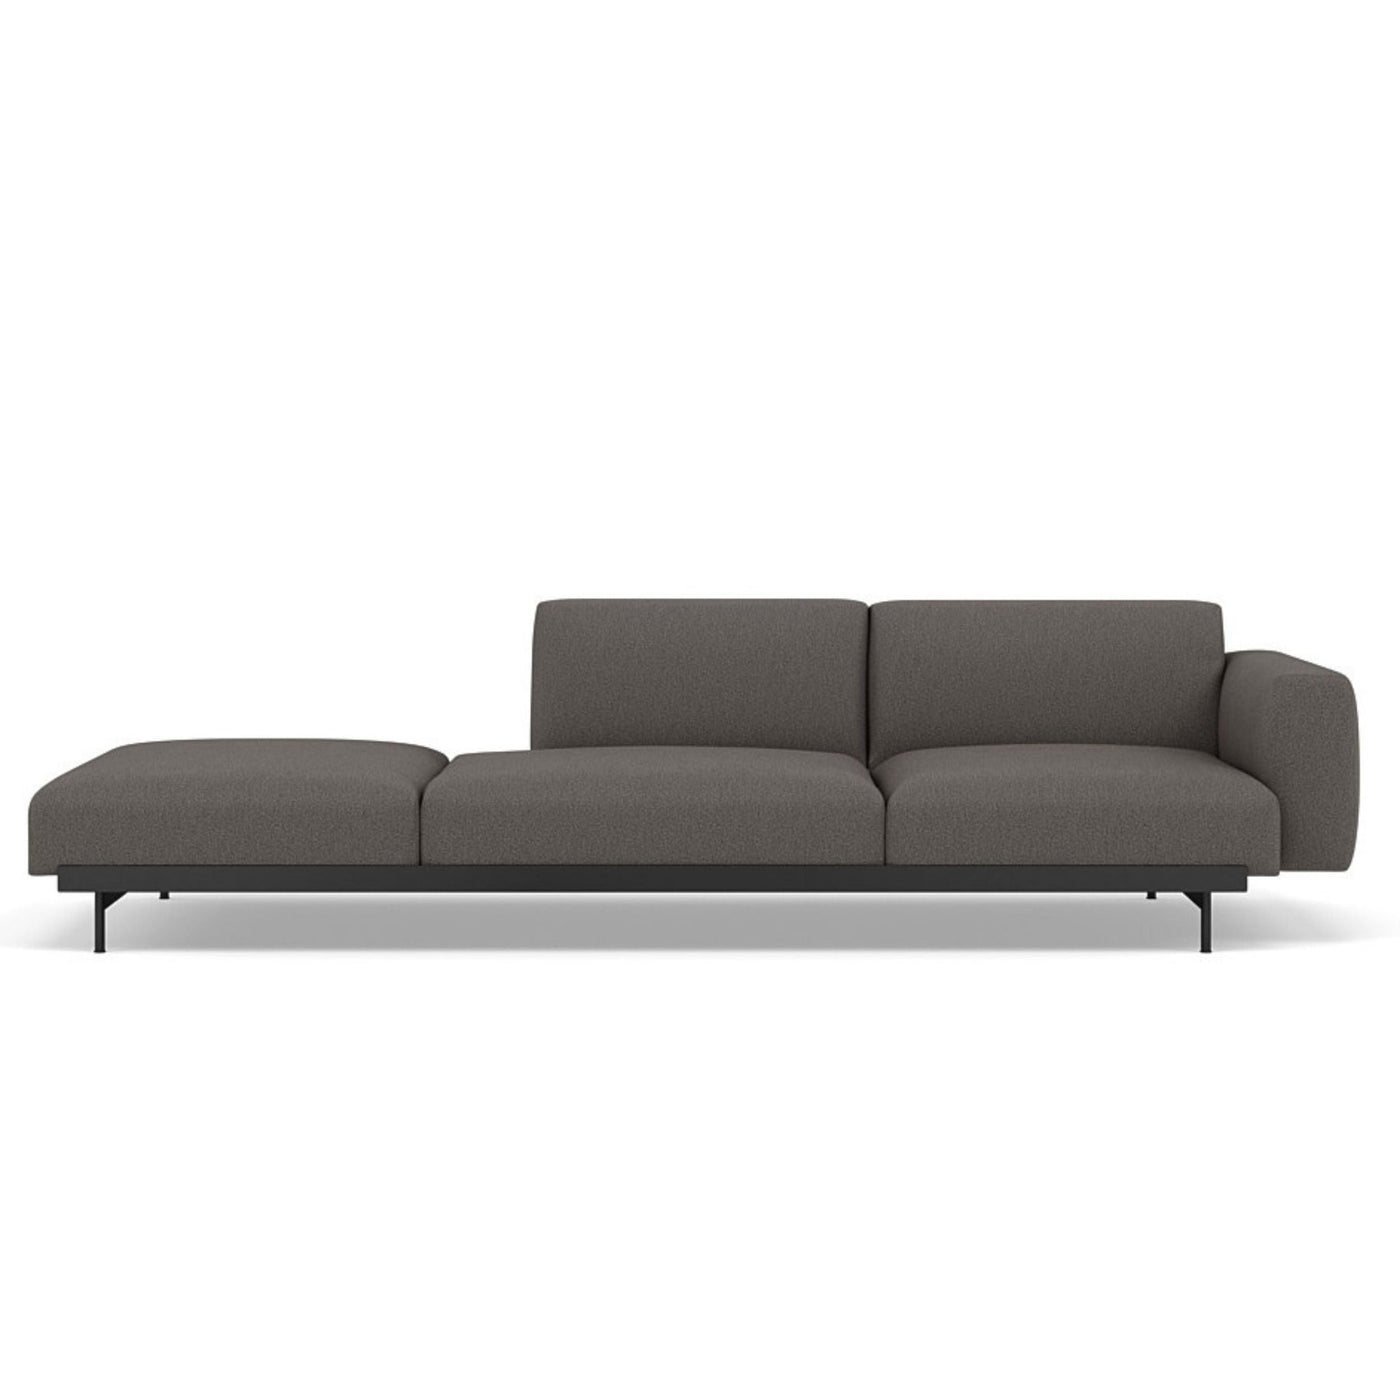 Muuto In Situ Modular 3 Seater Sofa, configuration 4. Made to order from someday designs. #colour_clay-9